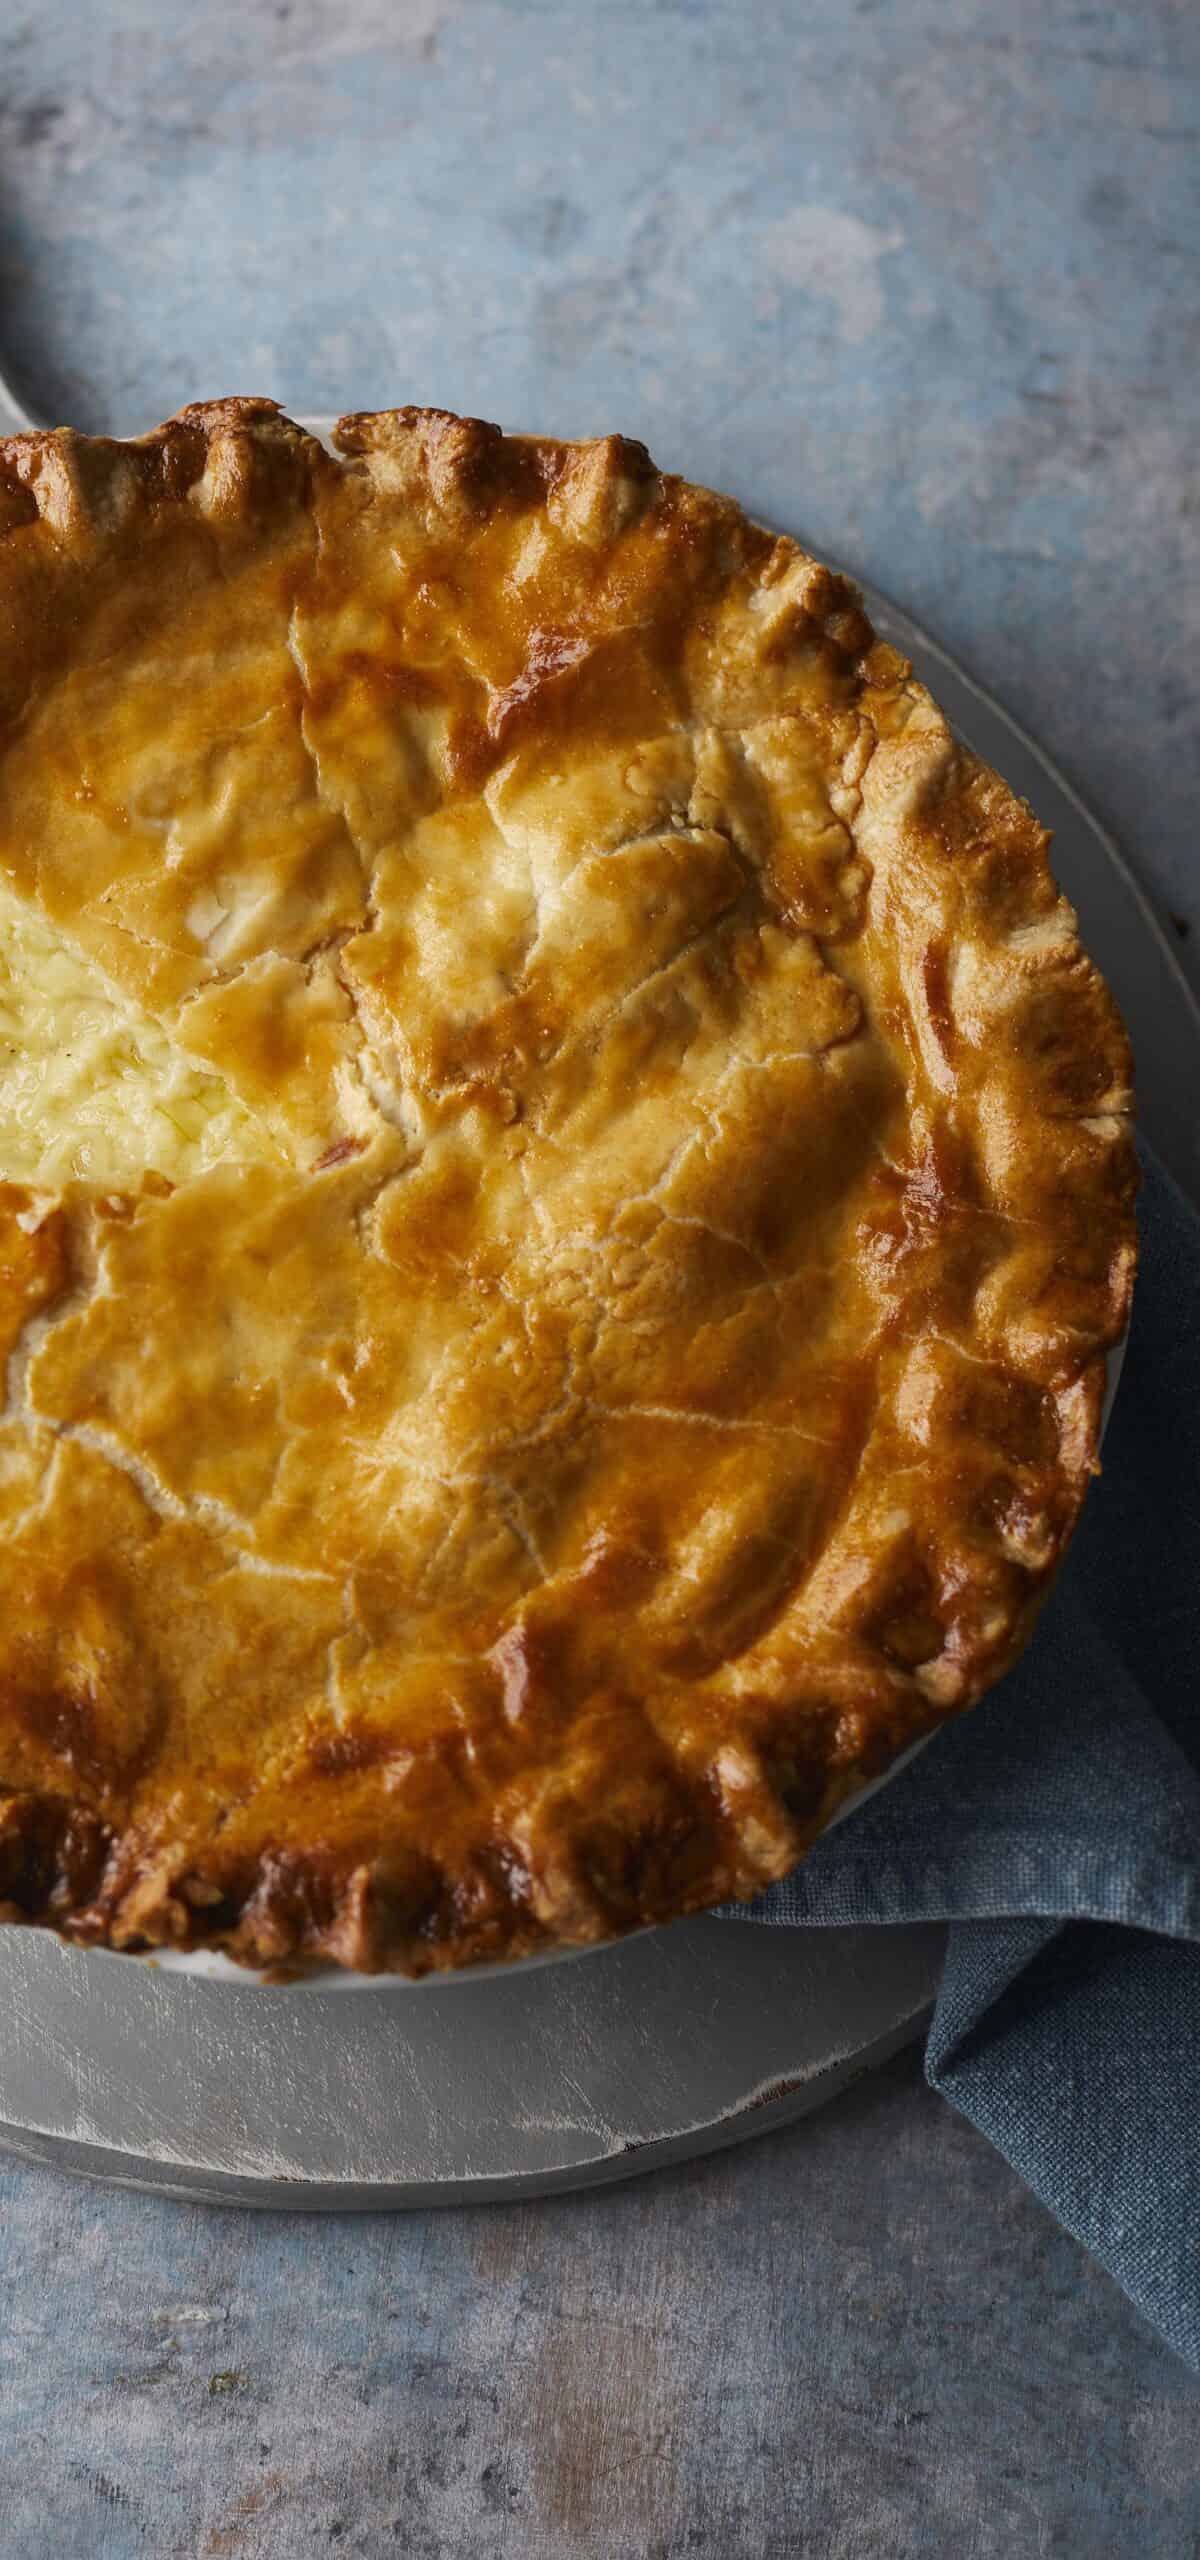 Delicious Onion Pie Recipe for a Tasty Evening Treat